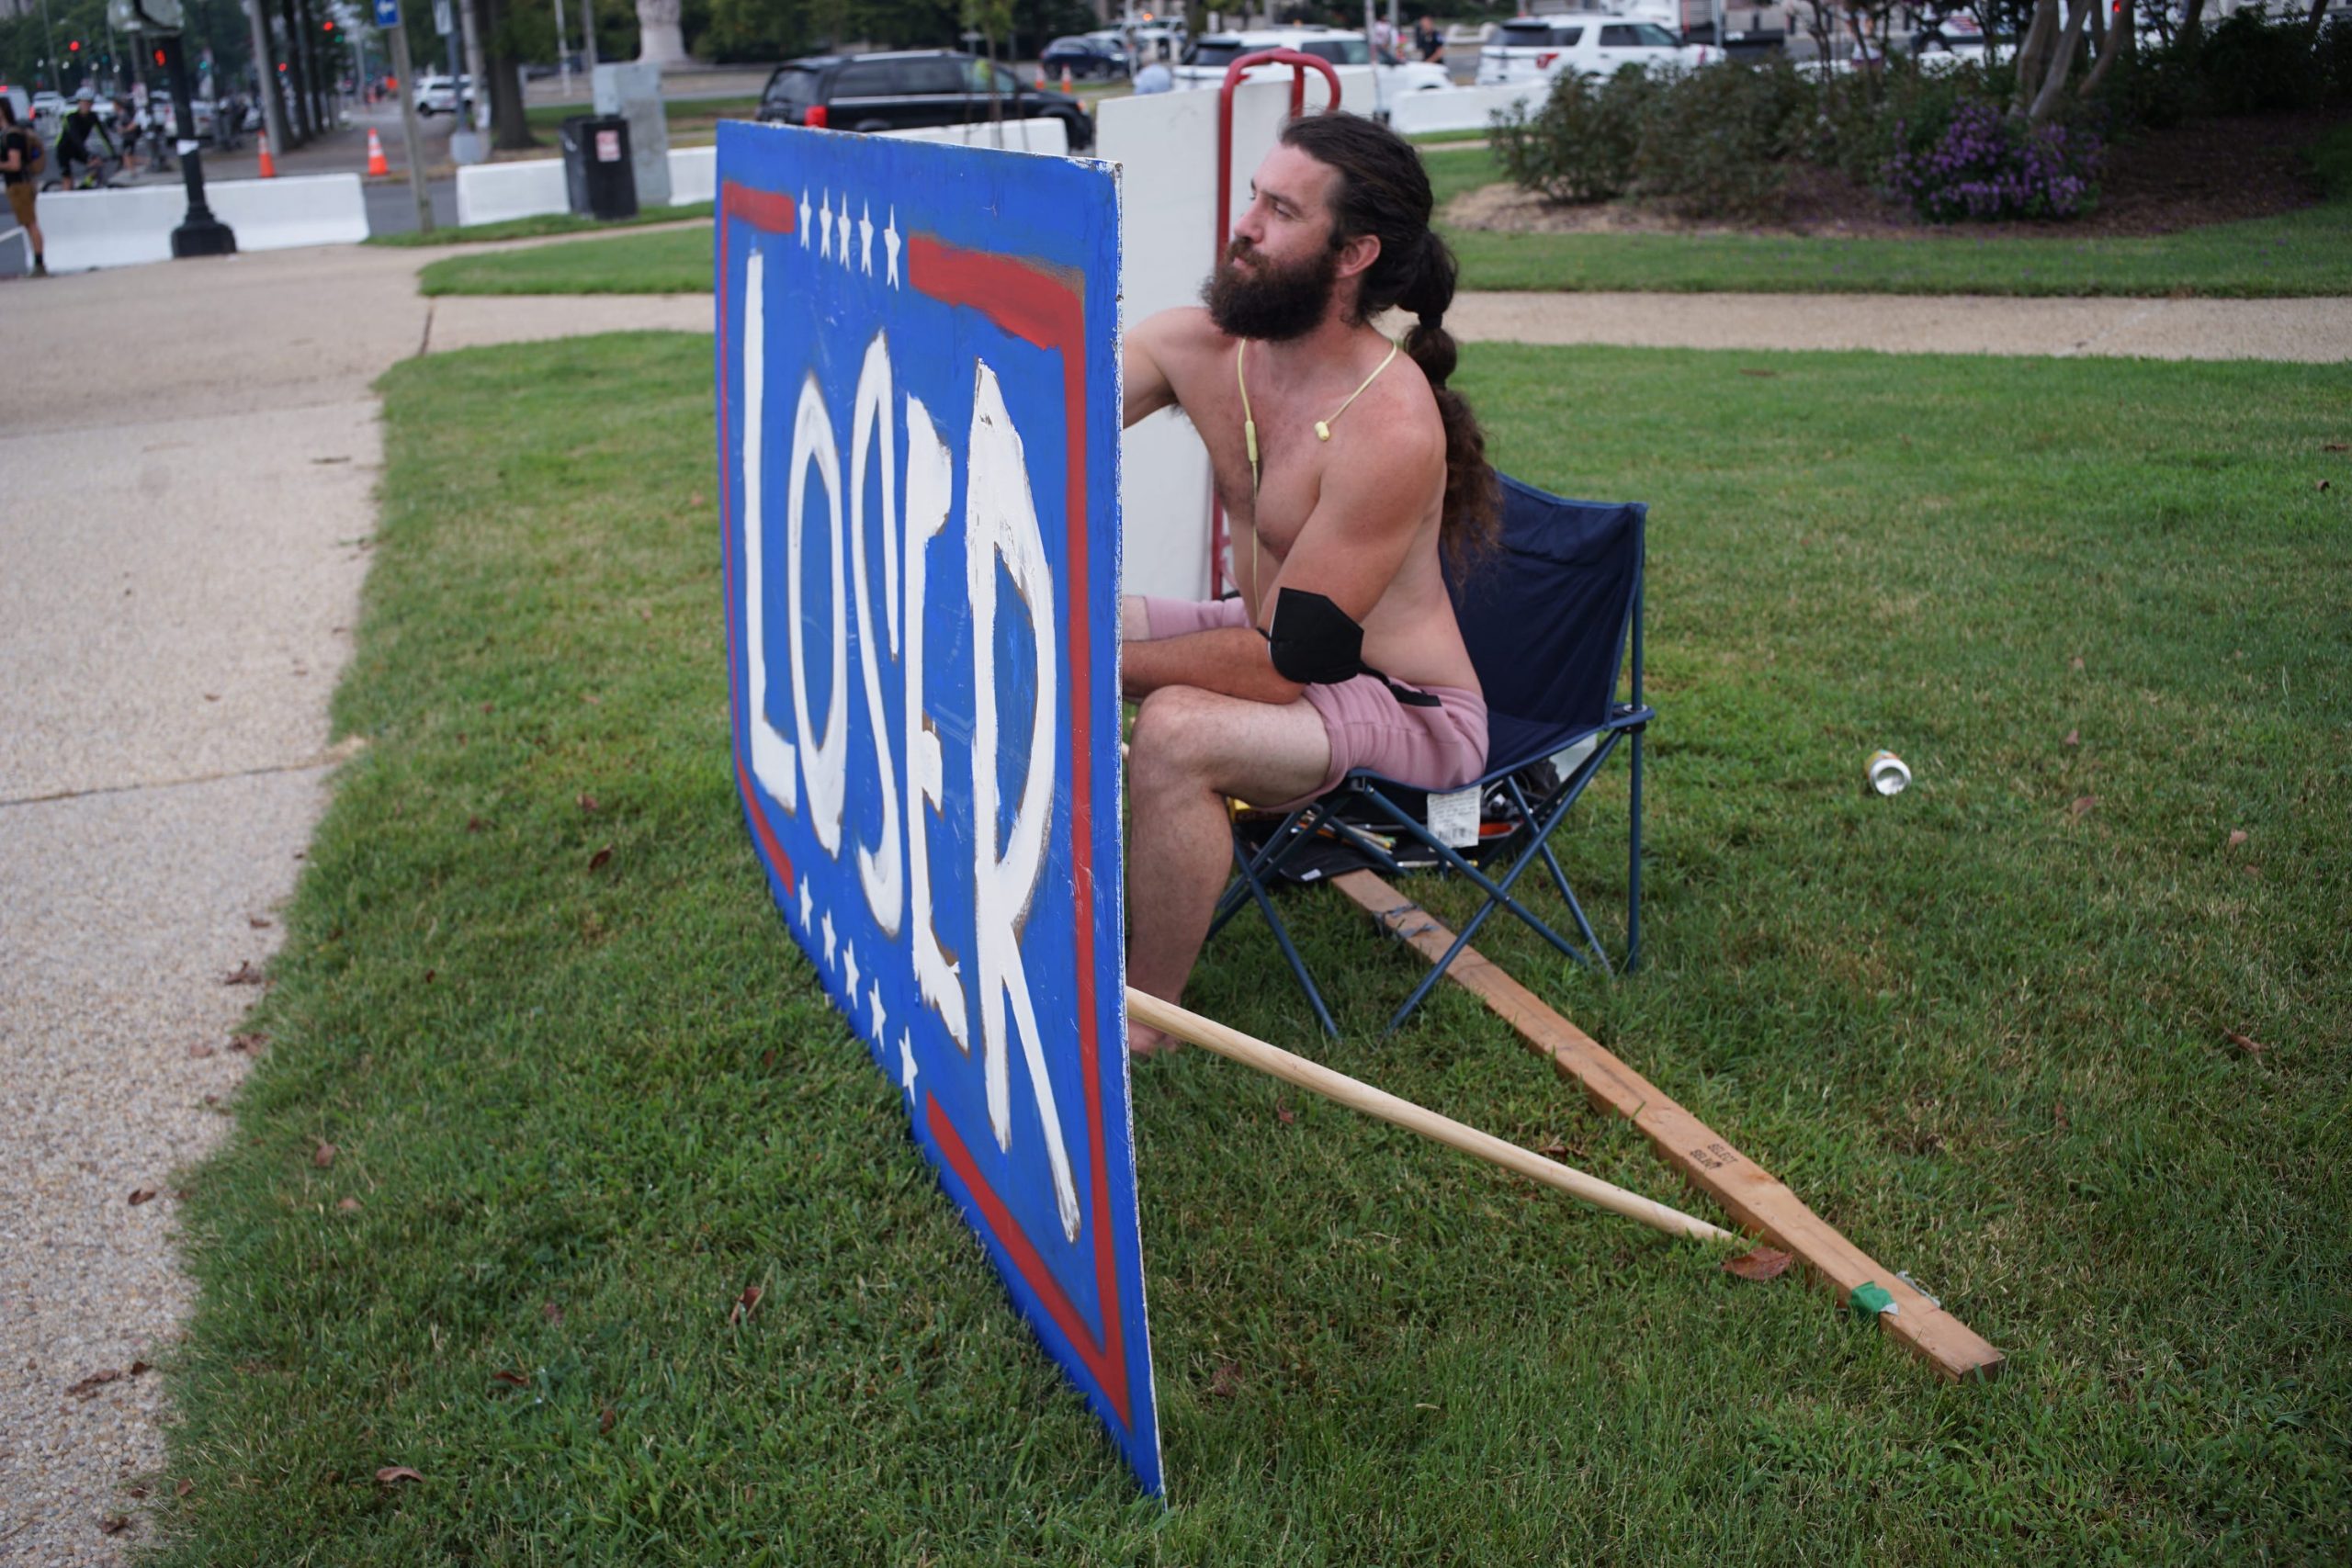 A shirtless man sits with a large sign that says Loser.